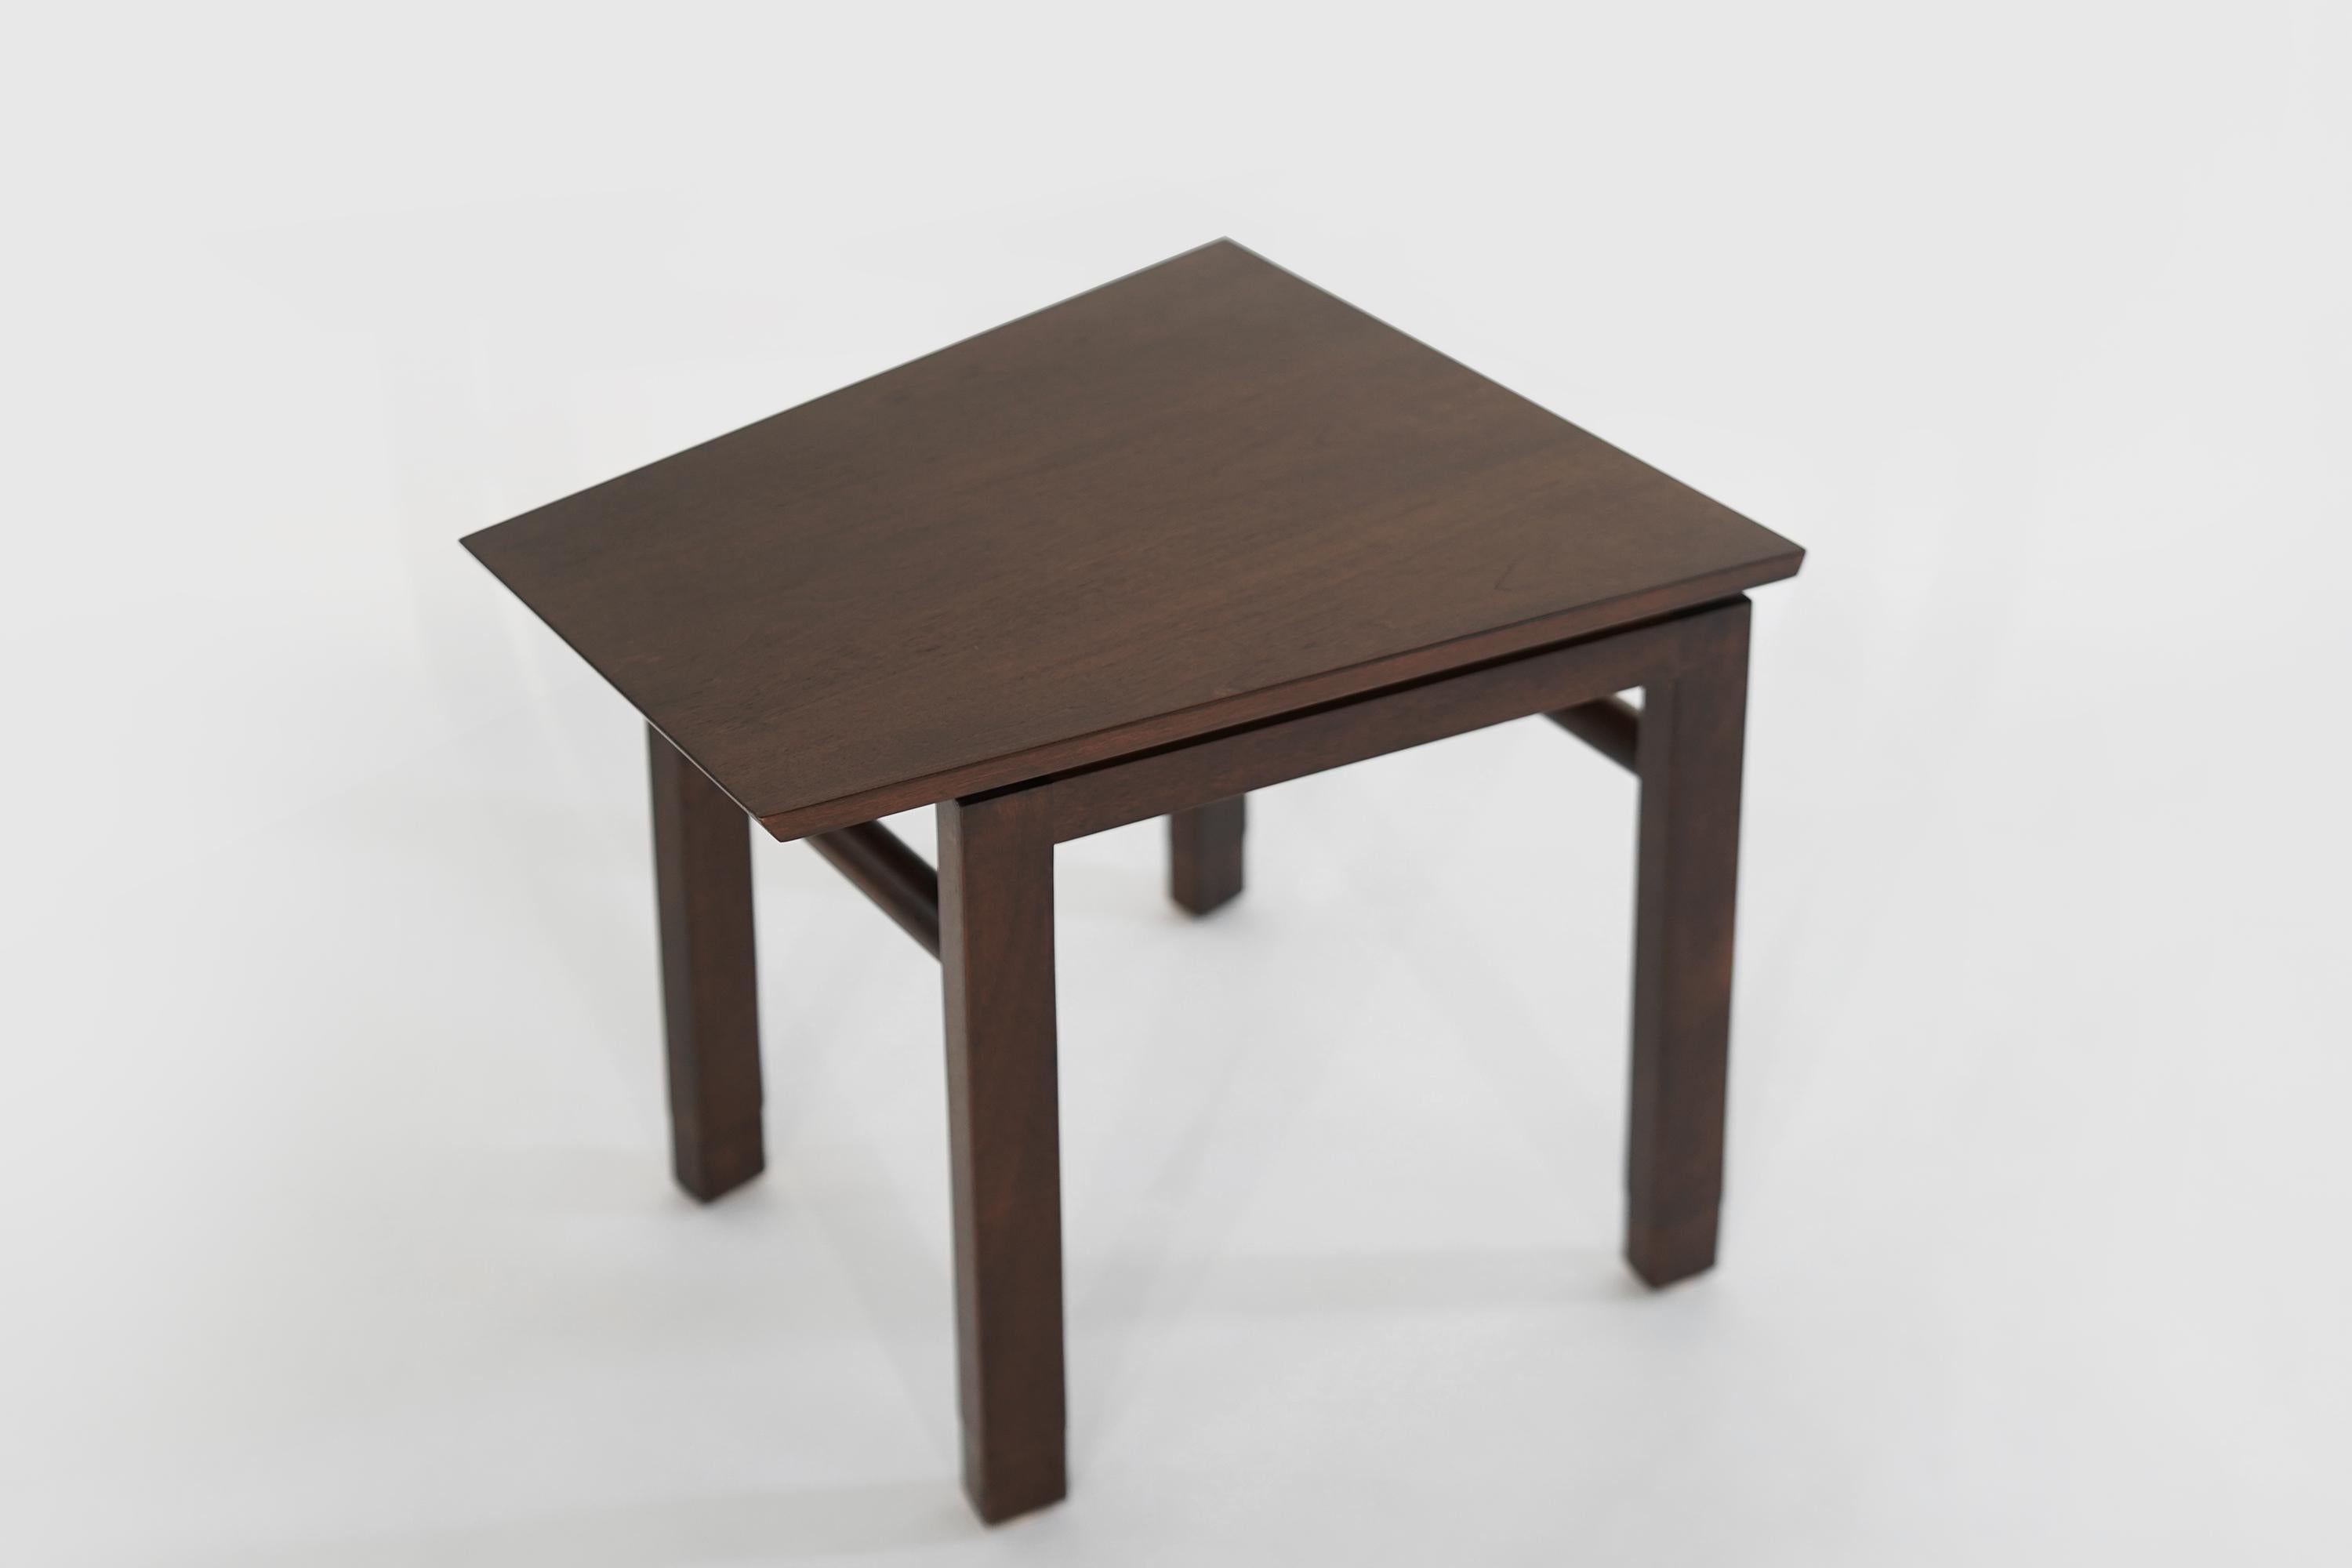 Occasional table designed by Edward Wormley for Dunbar circa 1950s. Mahogany with leather feet in newly restored condition.